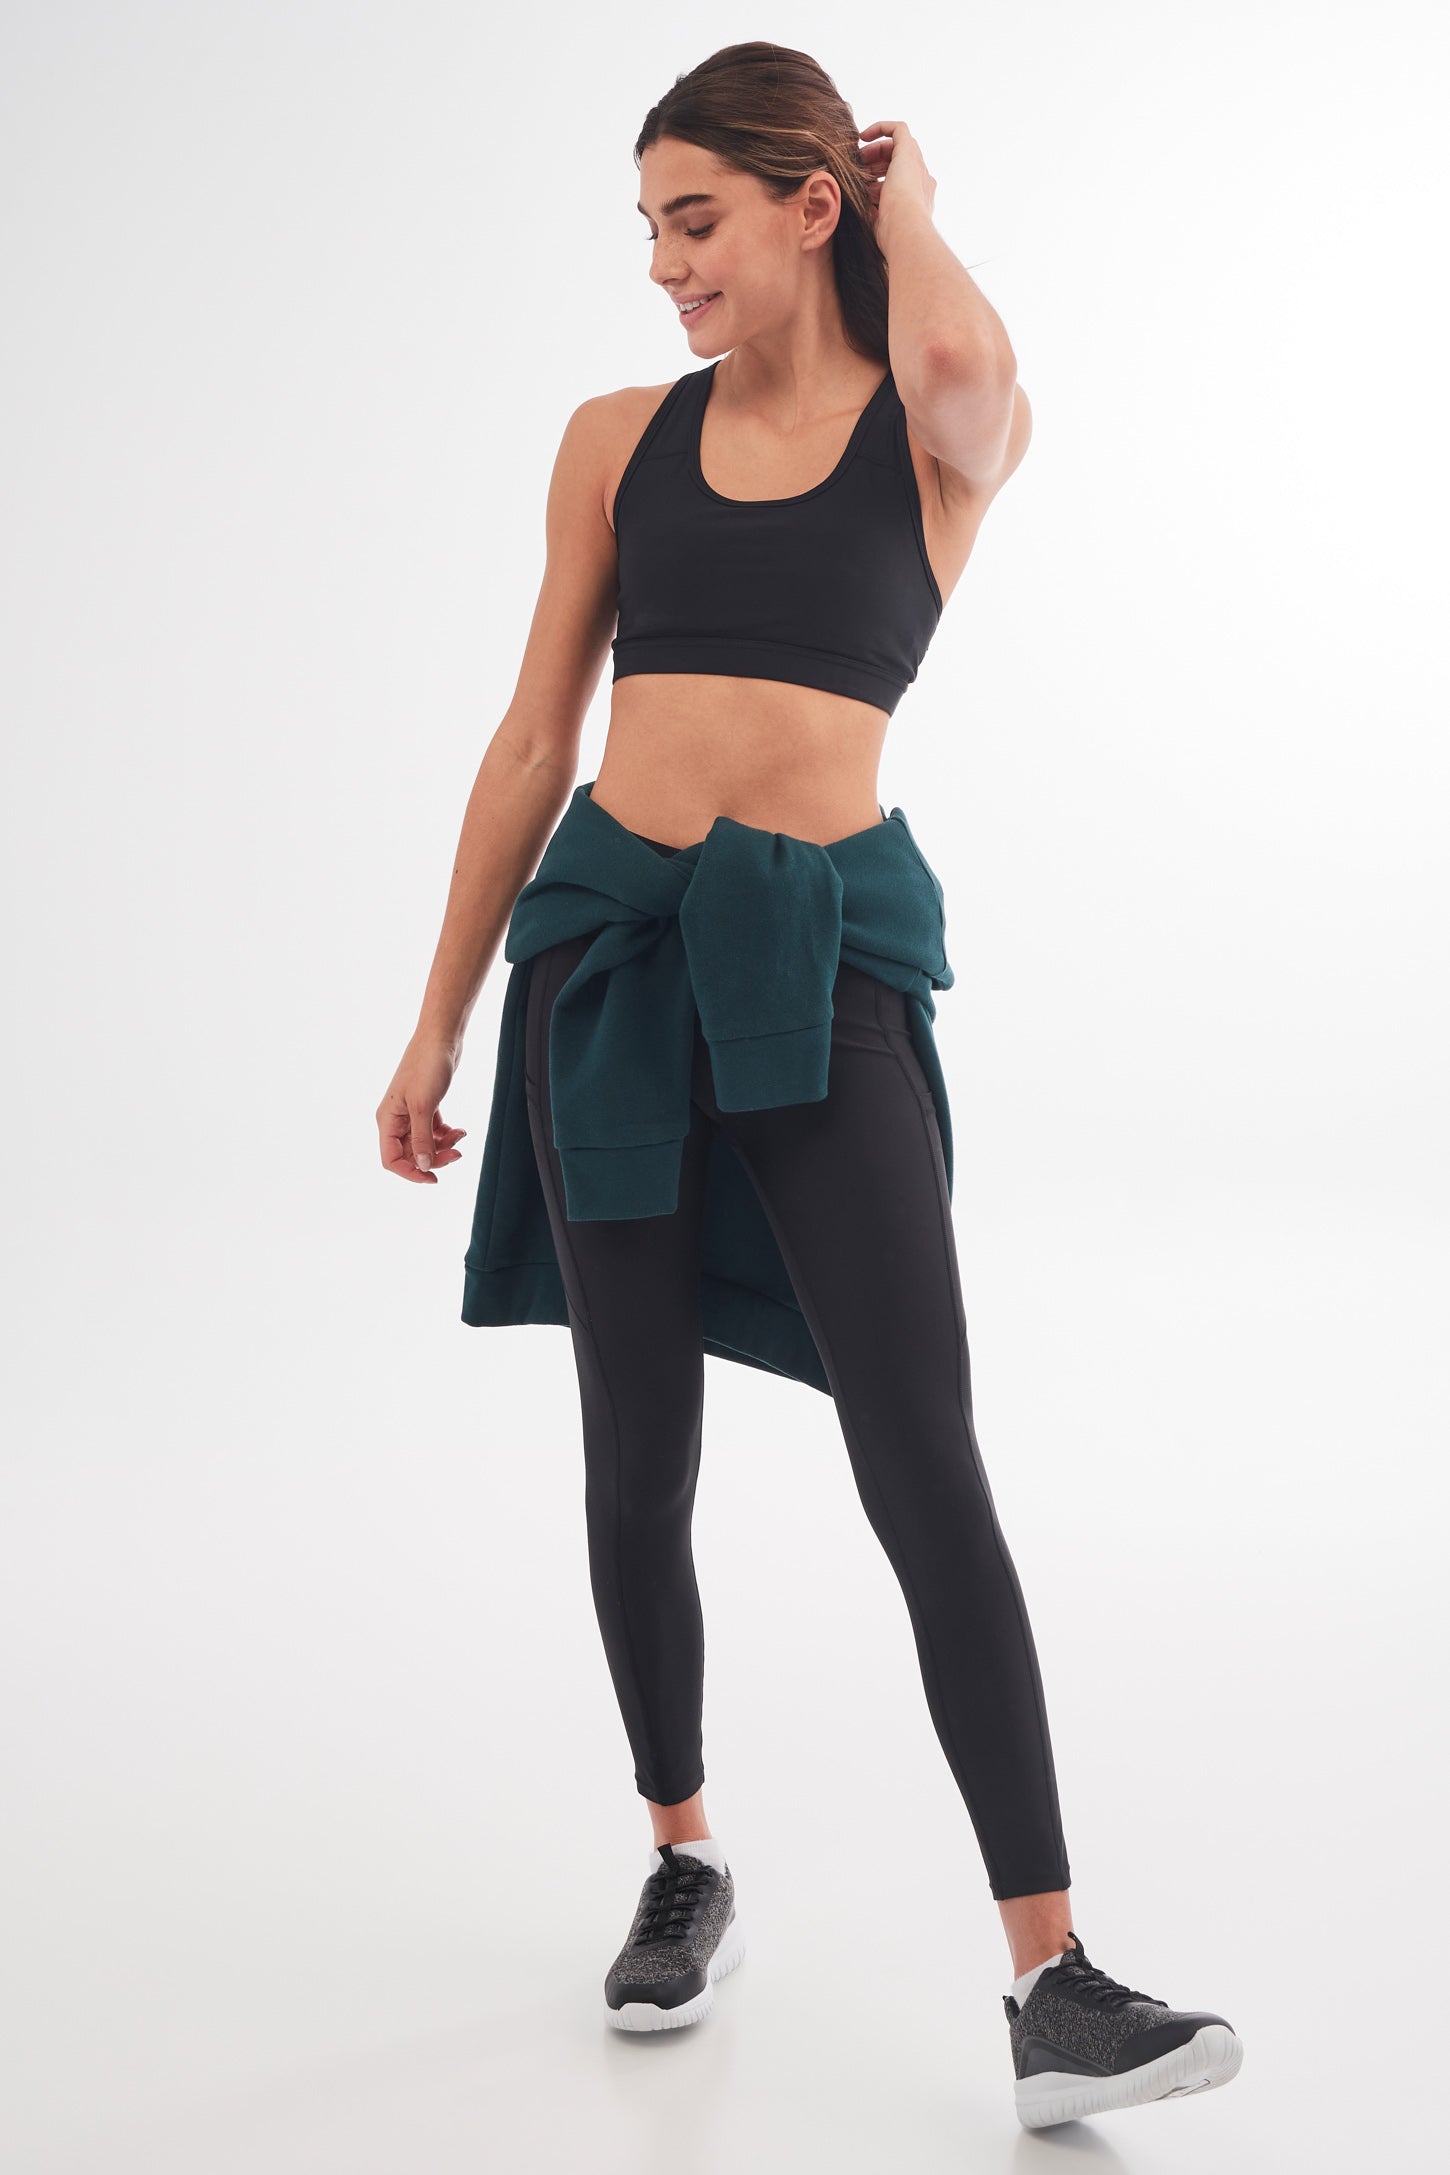 Discover 50+ high waisted athletic leggings